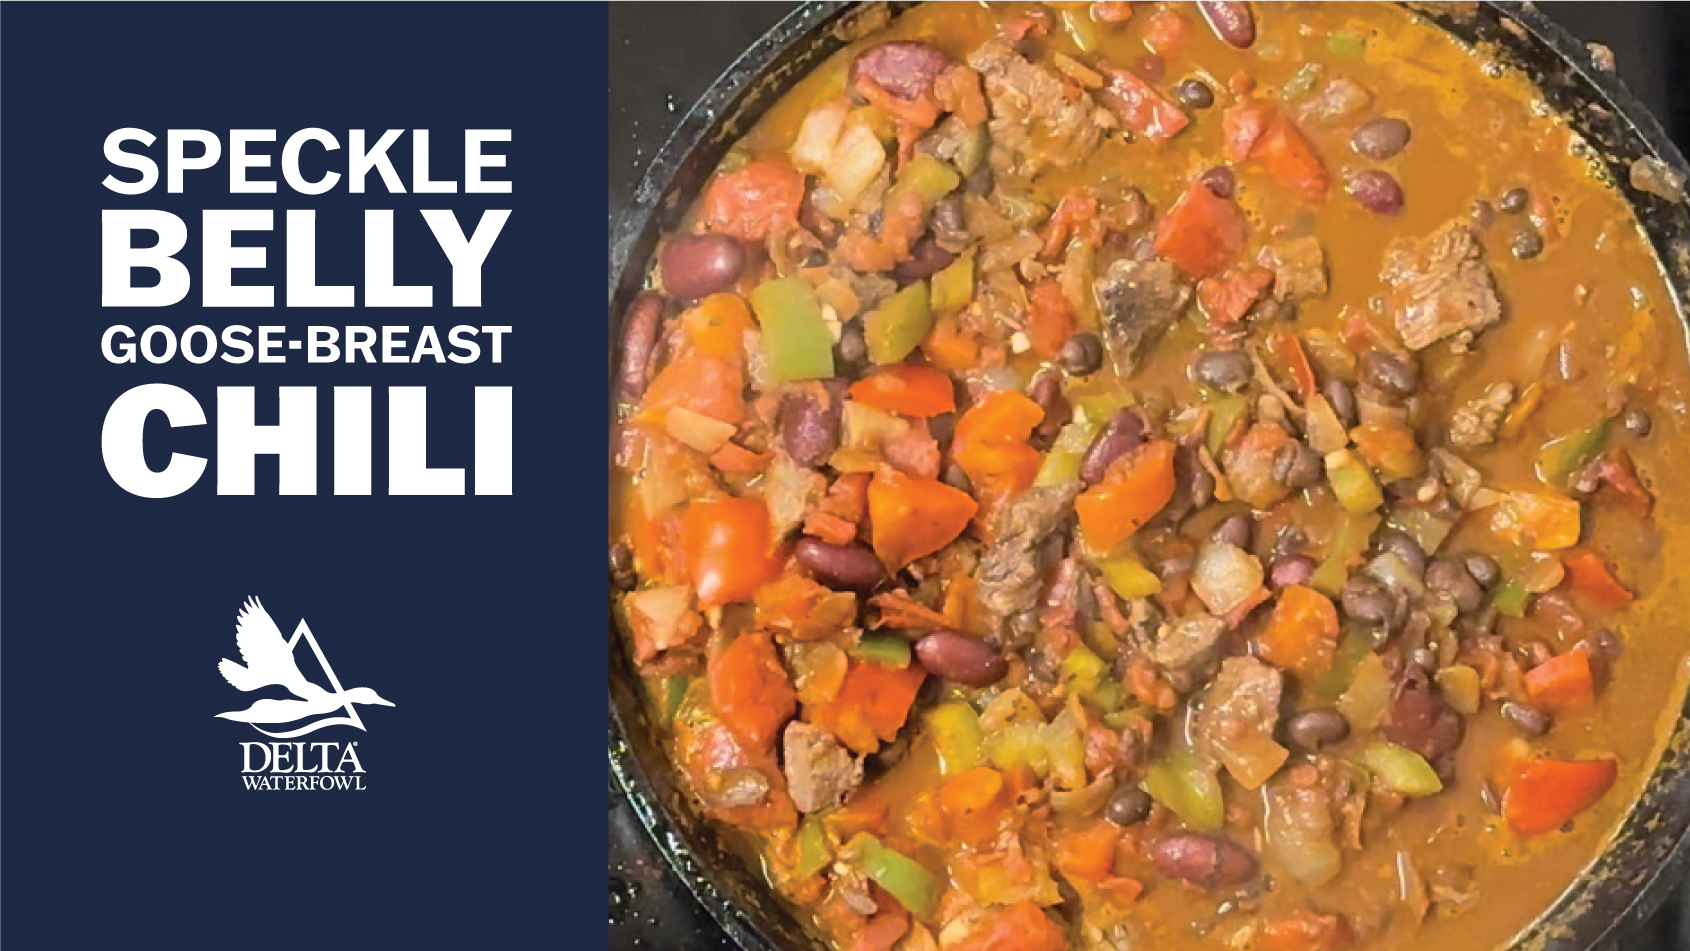 A cast-iron skillet on a stove is full of hot specklebelly goose chili.